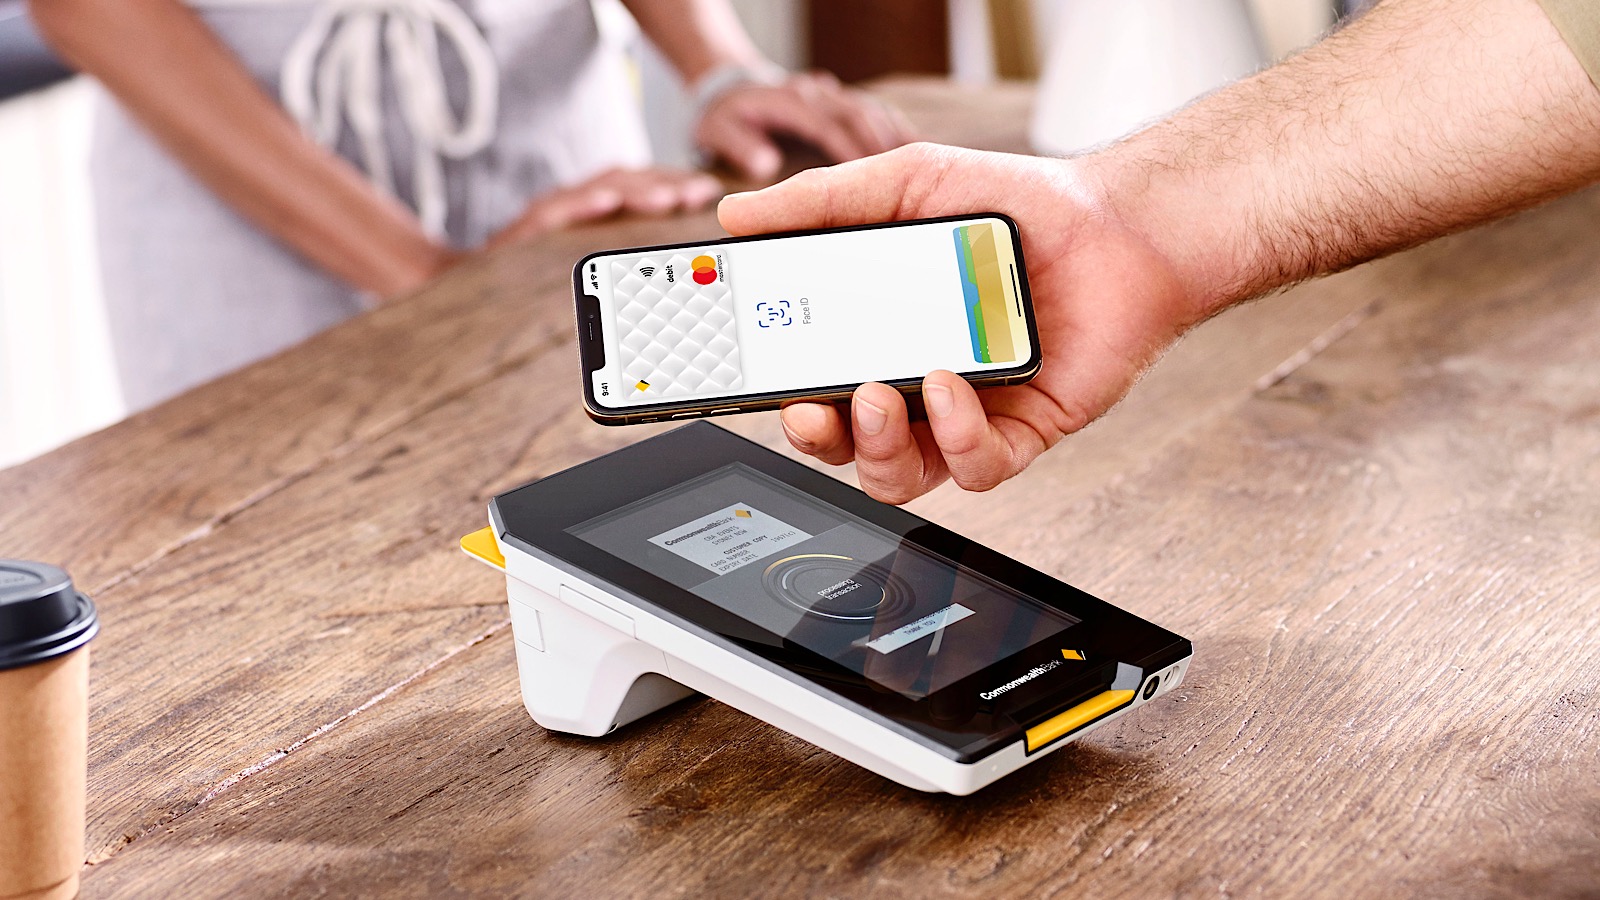 CommBank joins Apple Pay